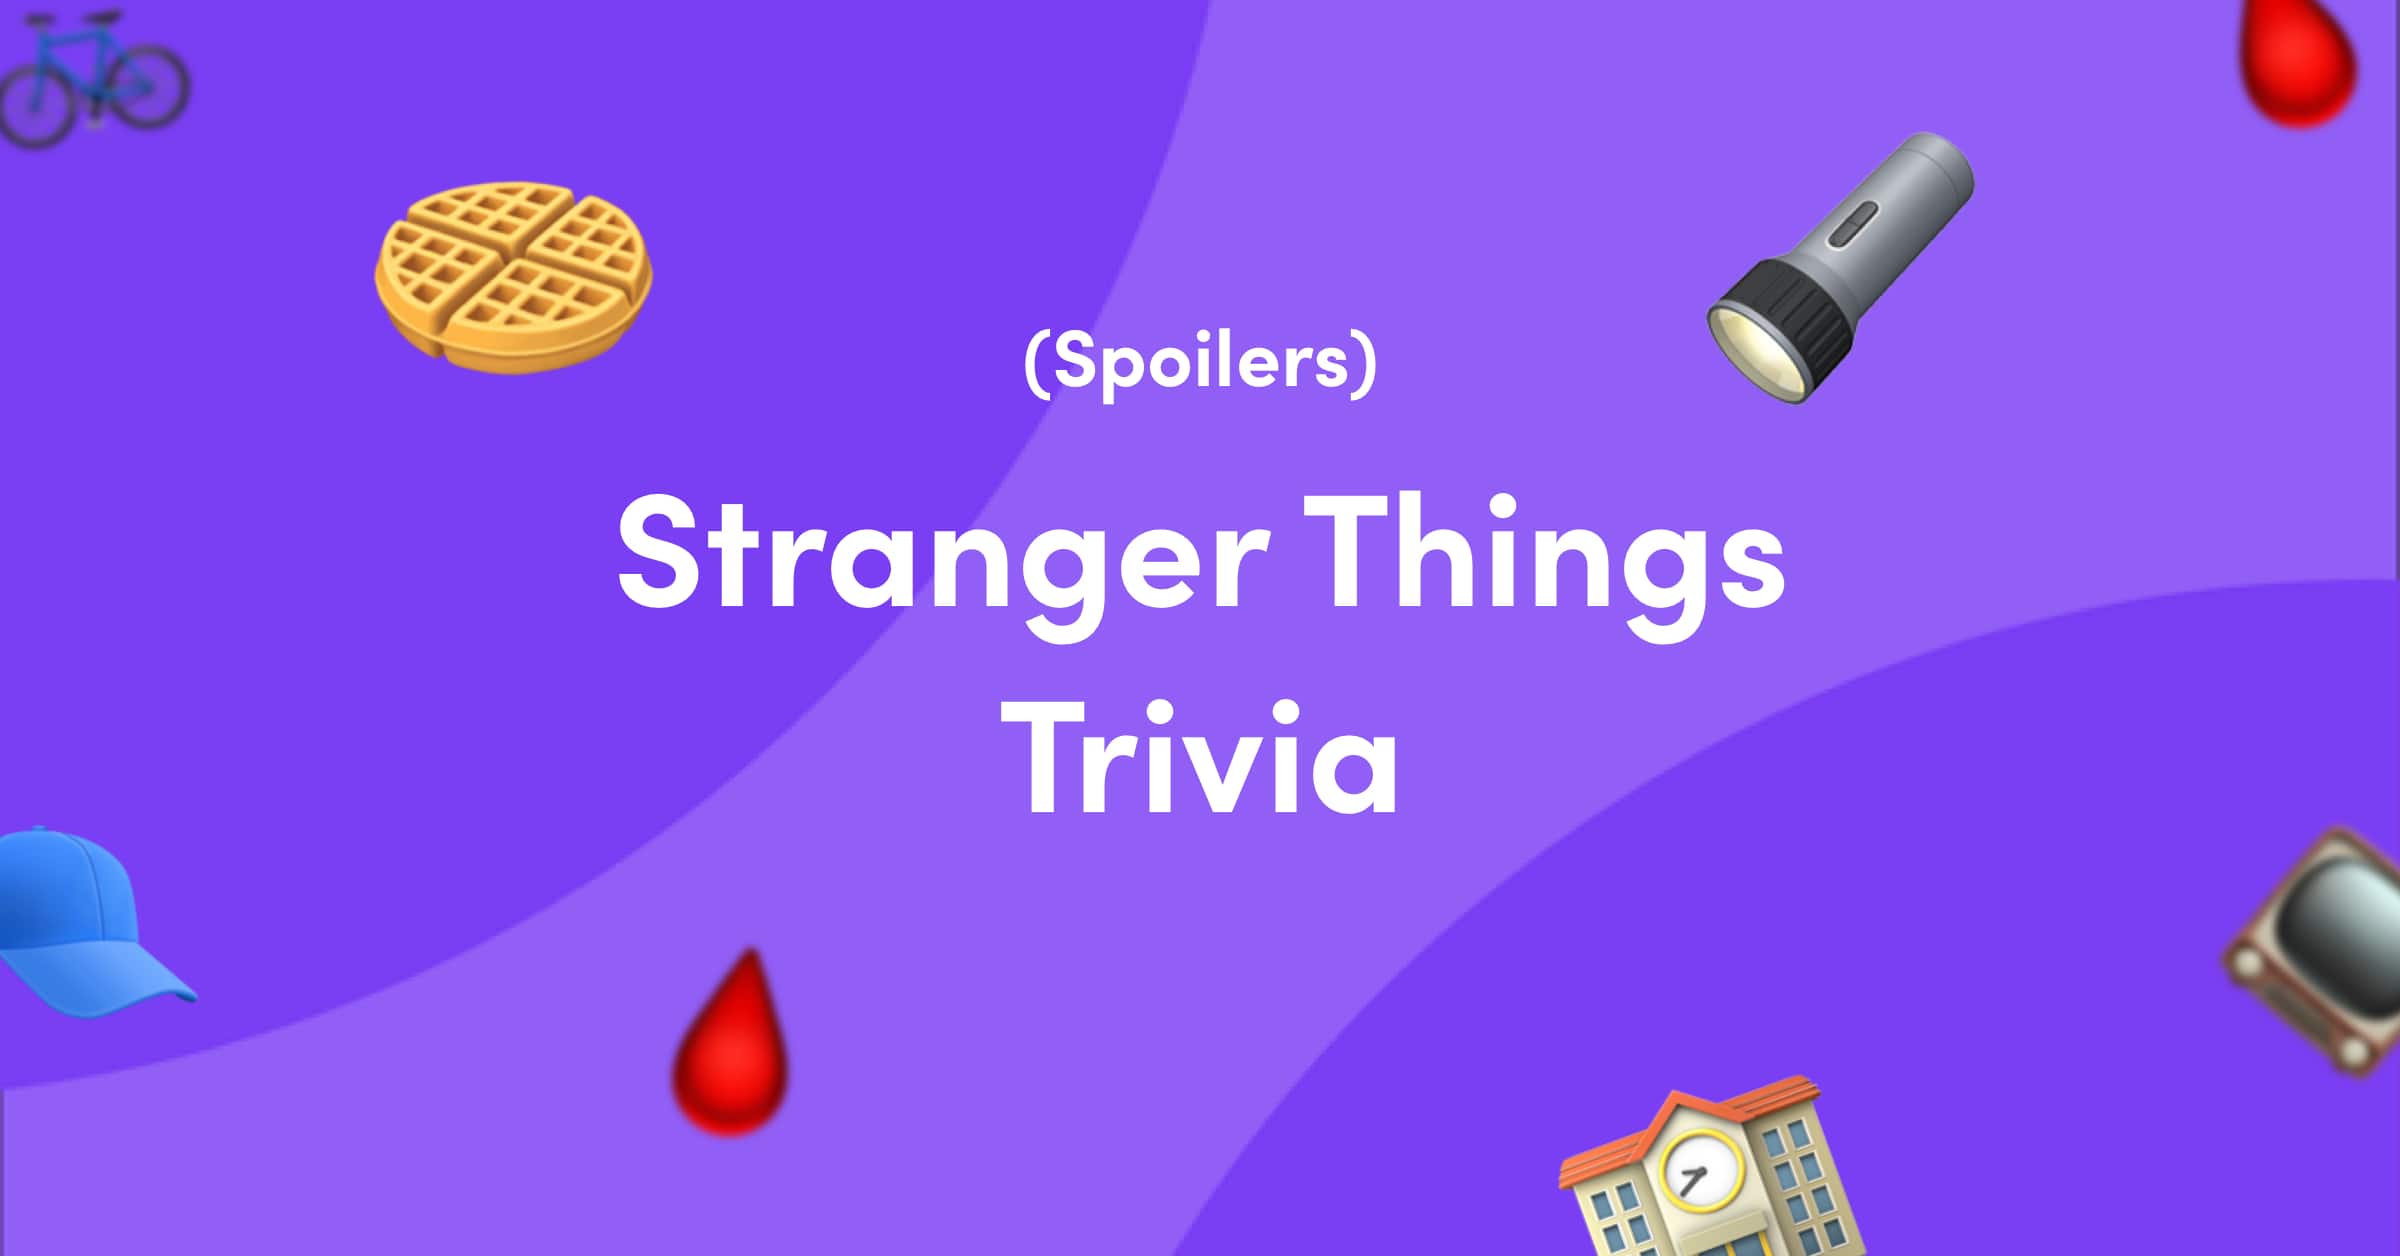 50 Stranger Things Quiz Questions and Answers [S4 Spoilers] - Kwizzbit